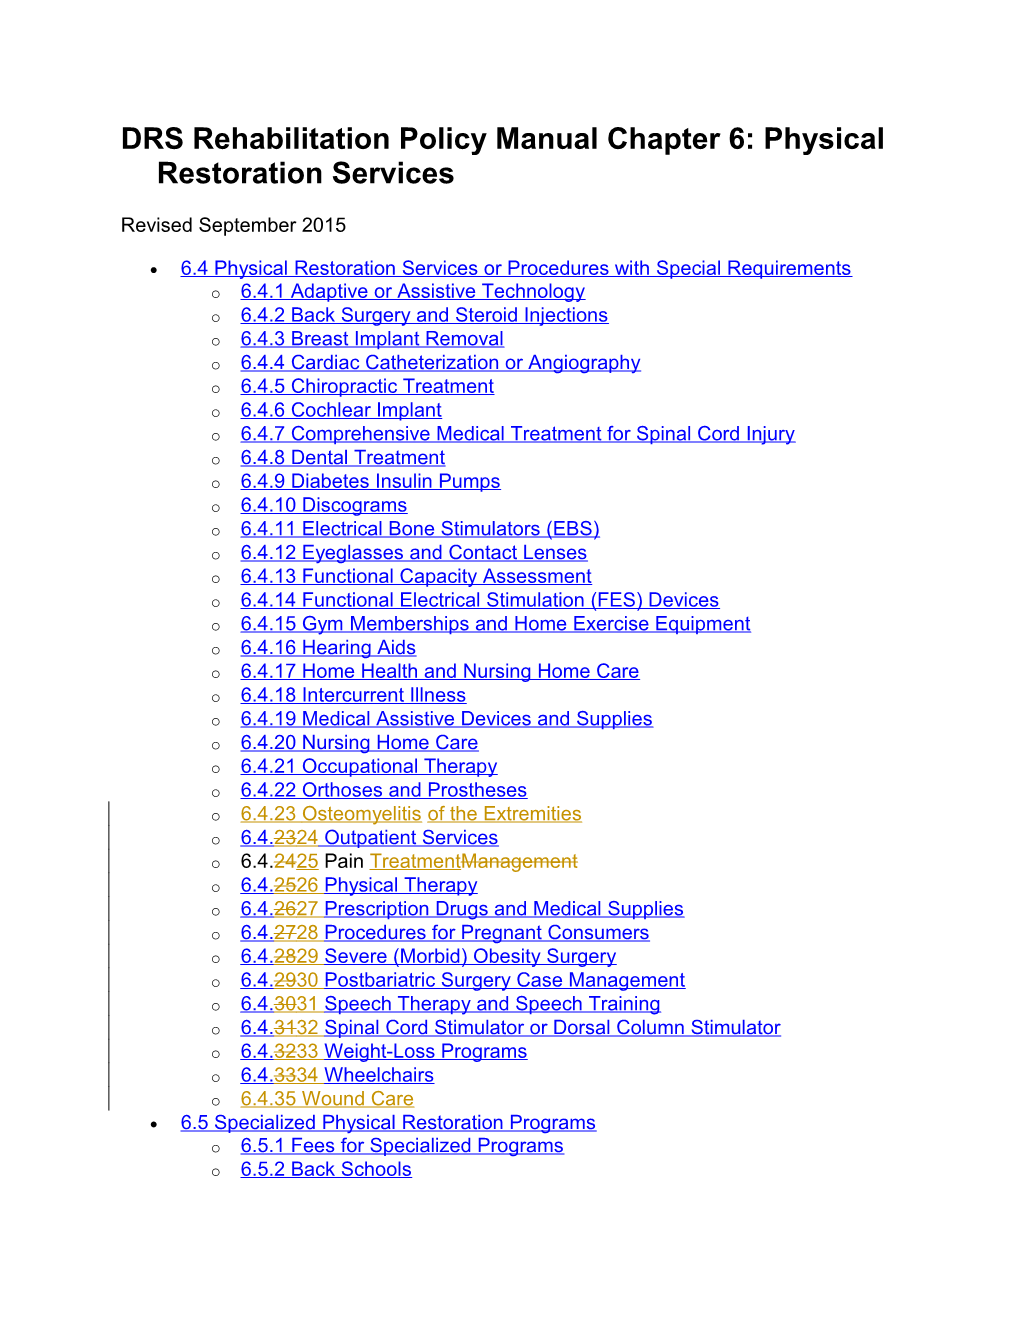 DRS RPM Chapter 6 Revisions, September 2015